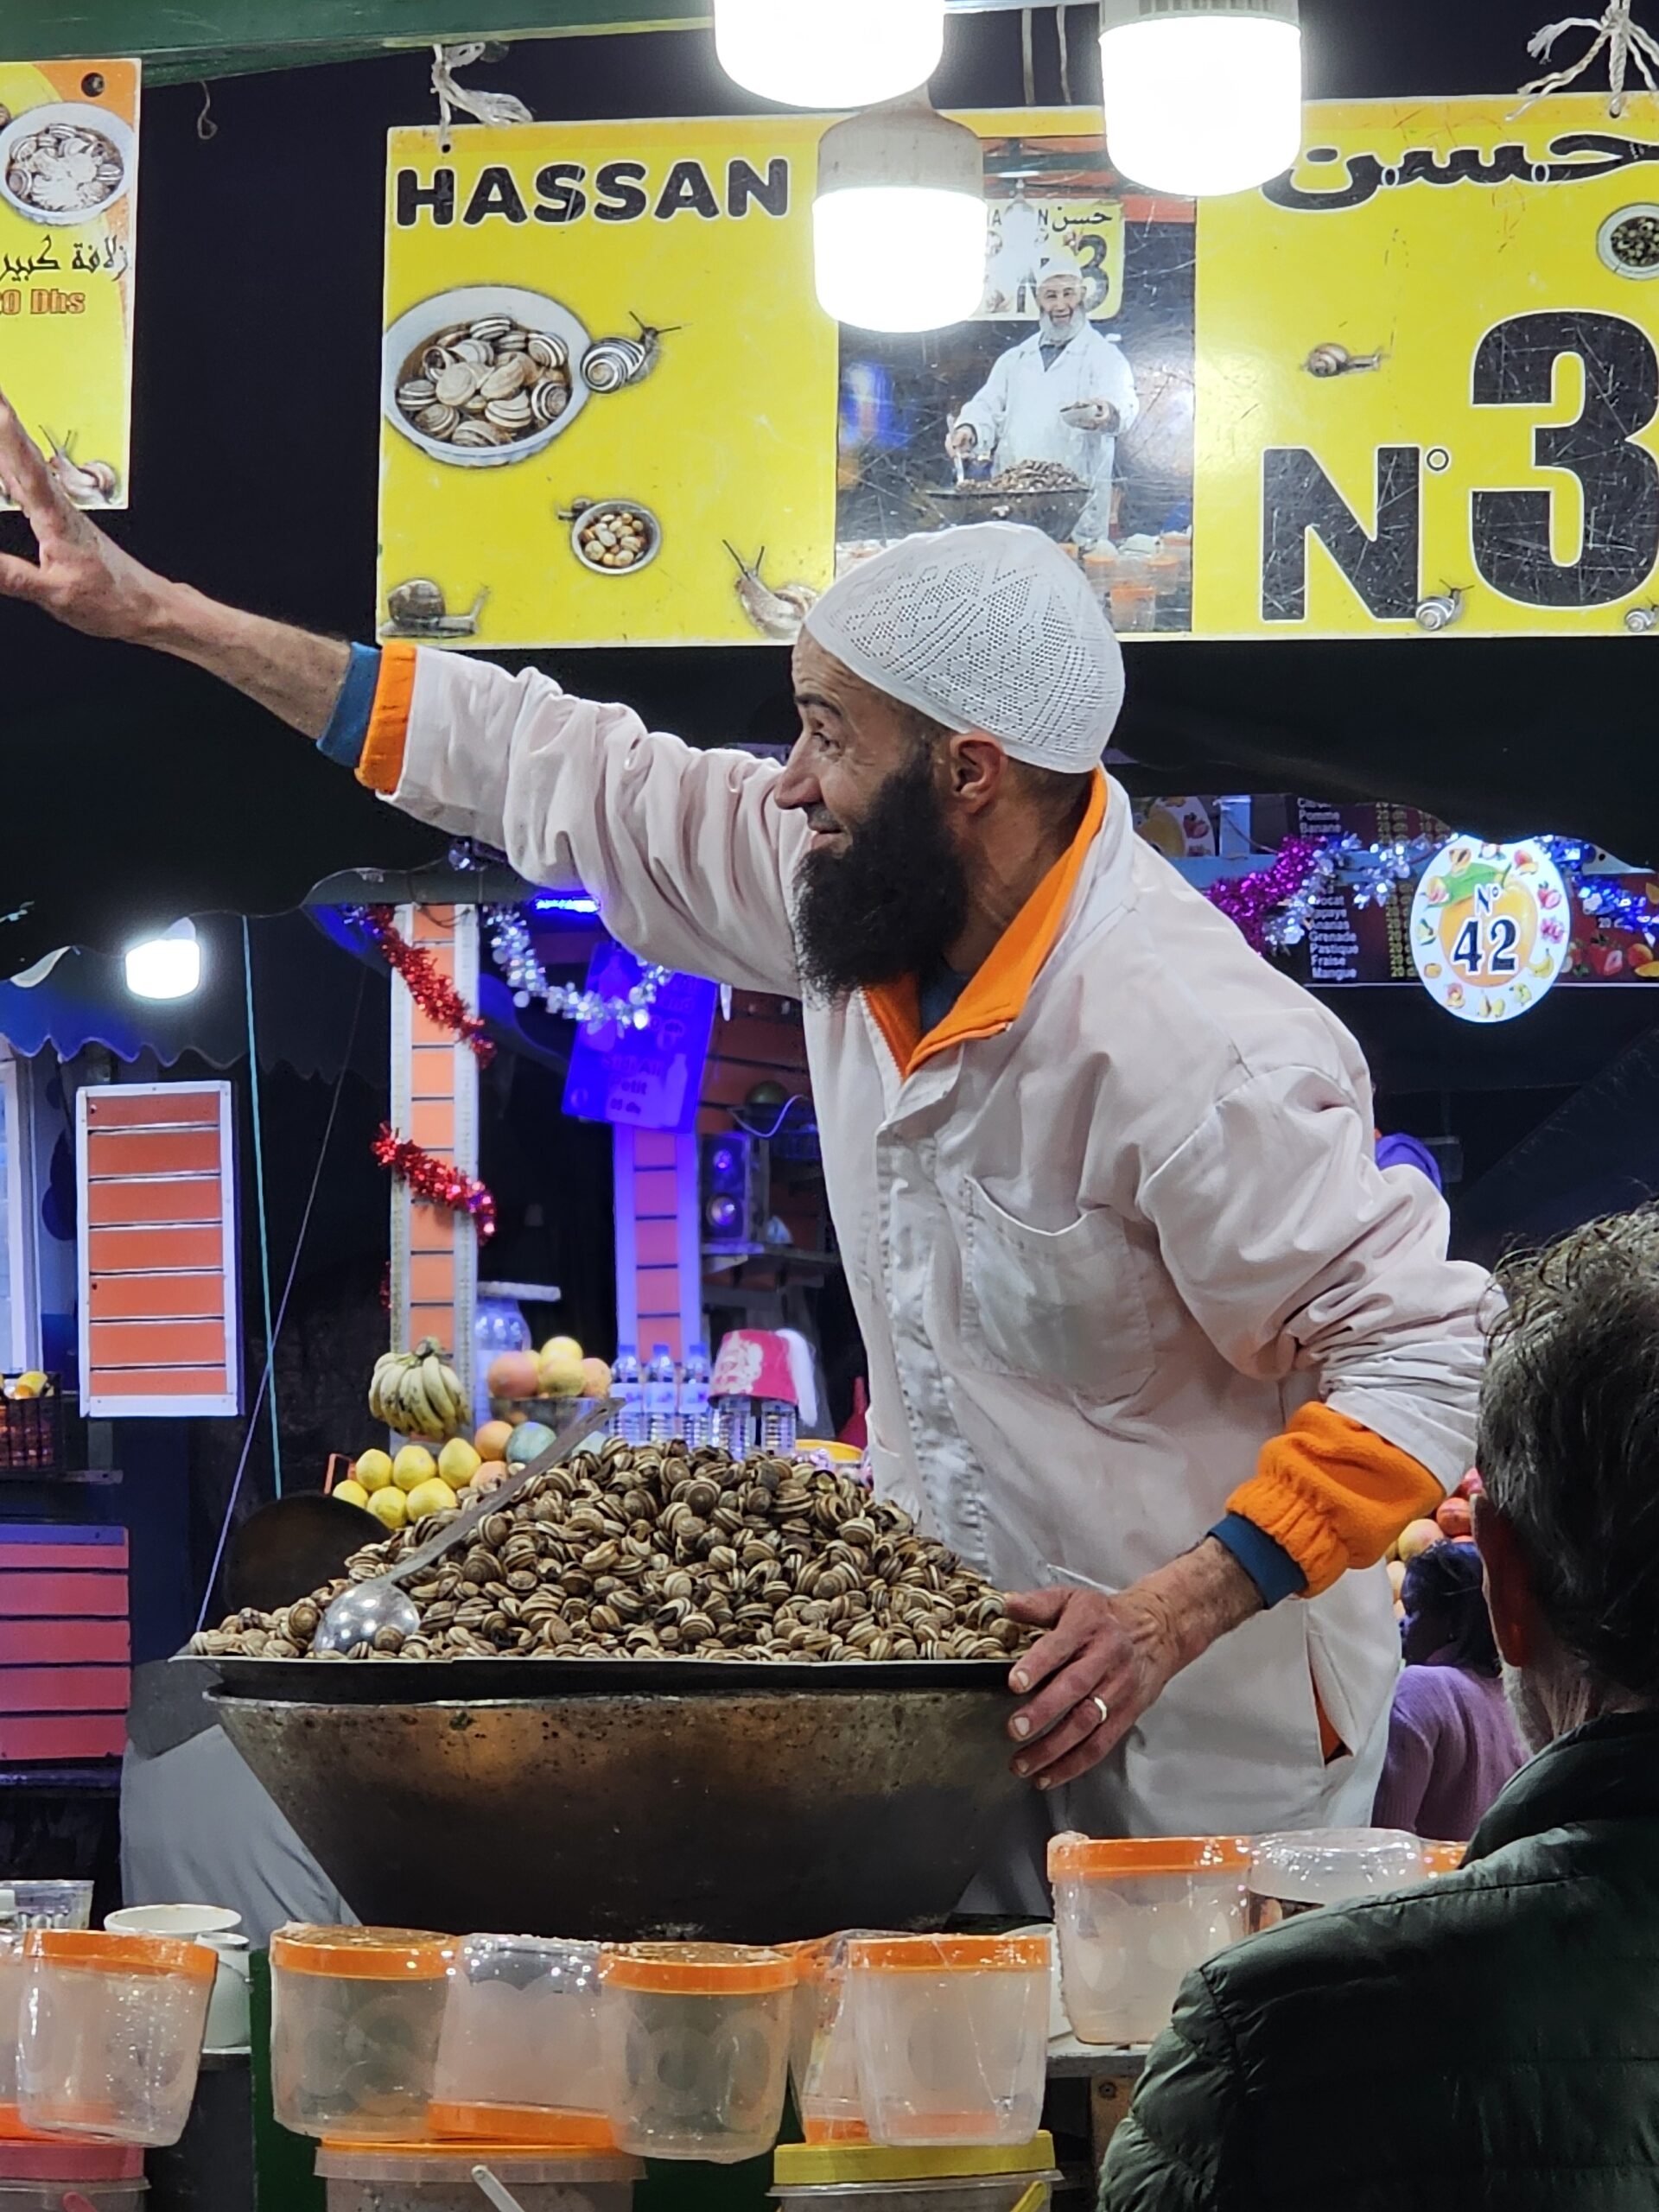 A man in white chef's coat and hat selling local delicacy, snail soup, at Jemaa el Fnaa, Marrakesh. Image by 360onhistory.com